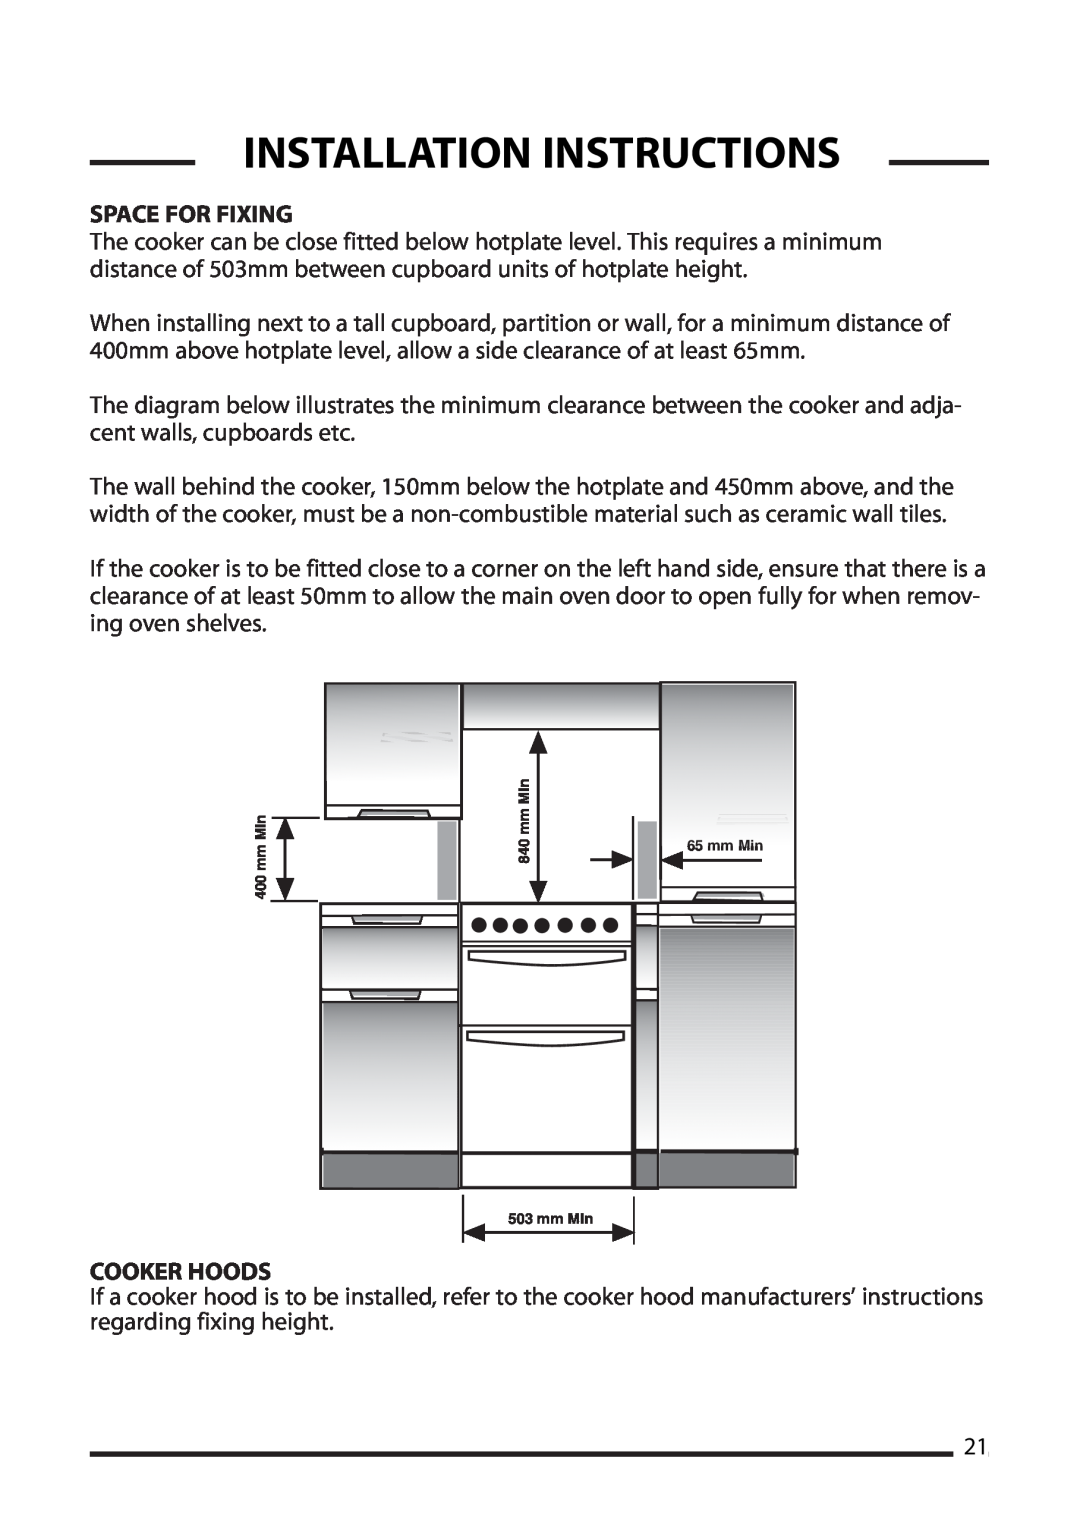 Cannon 10265G, 10269G Mk2, 10260G, 10258G, 10250G, 10255G, 10266G Installation Instructions, Space For Fixing, Cooker Hoods 